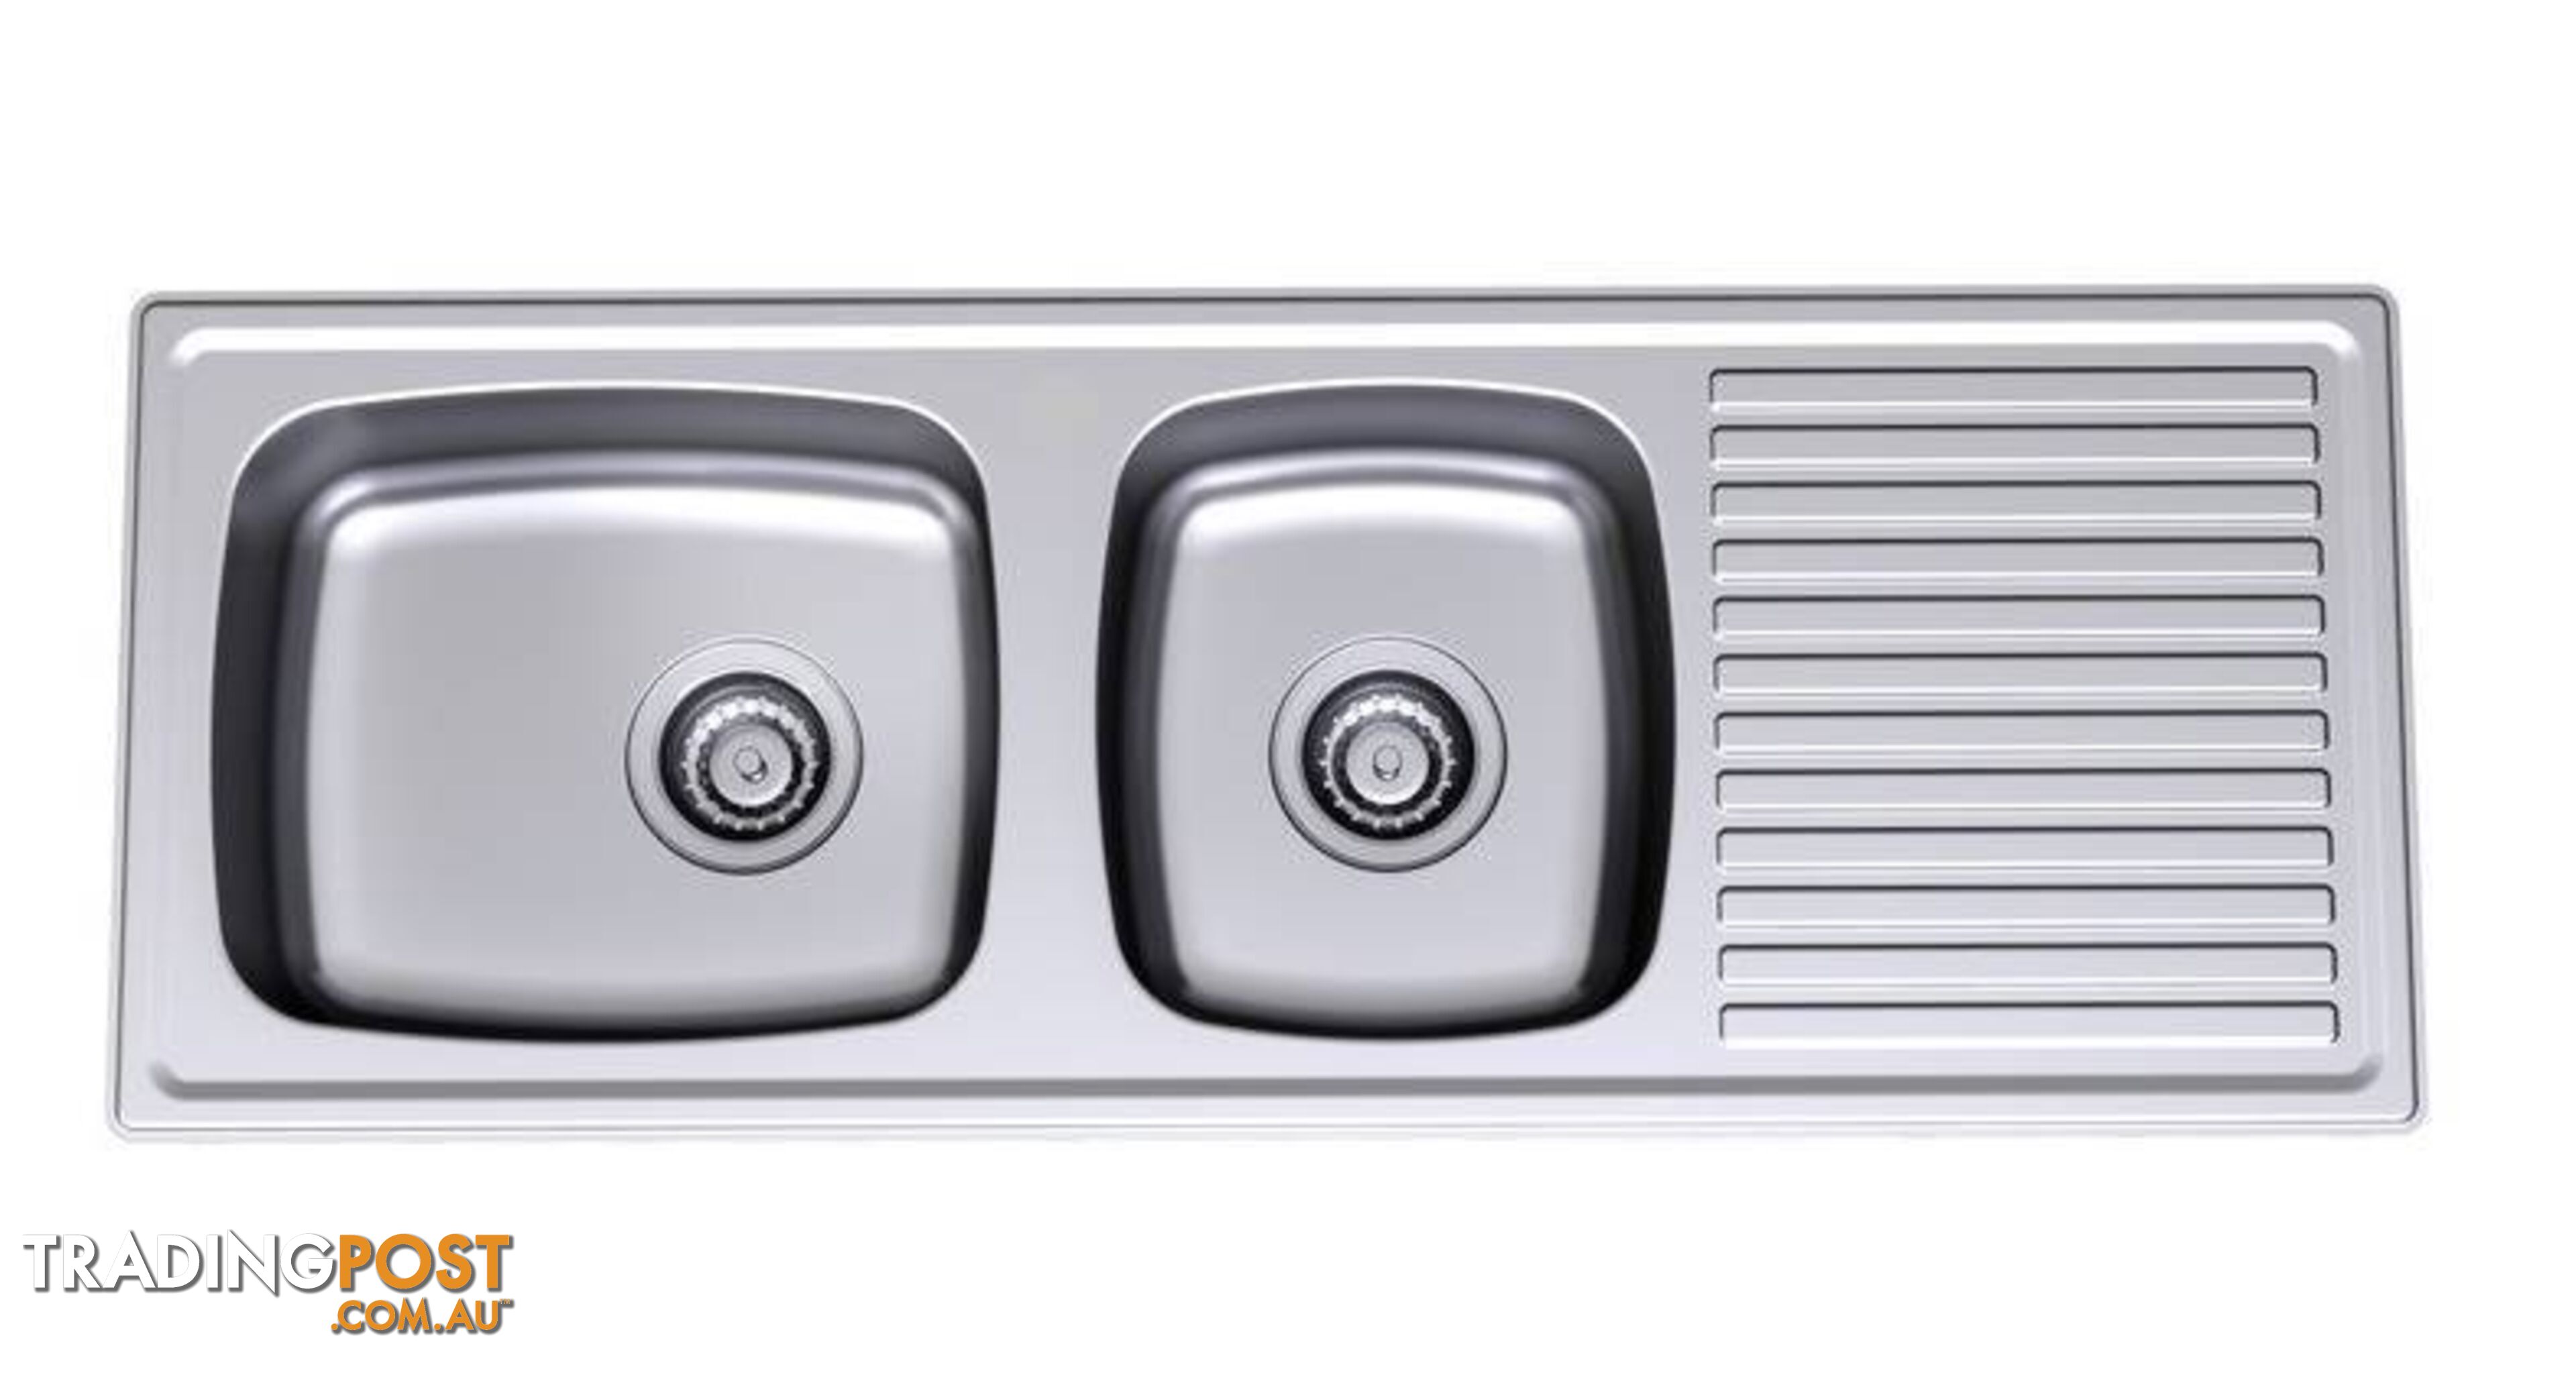 CLARK CANDICE 1.5 END BOWL STAINLESS STEEL SINK (new)